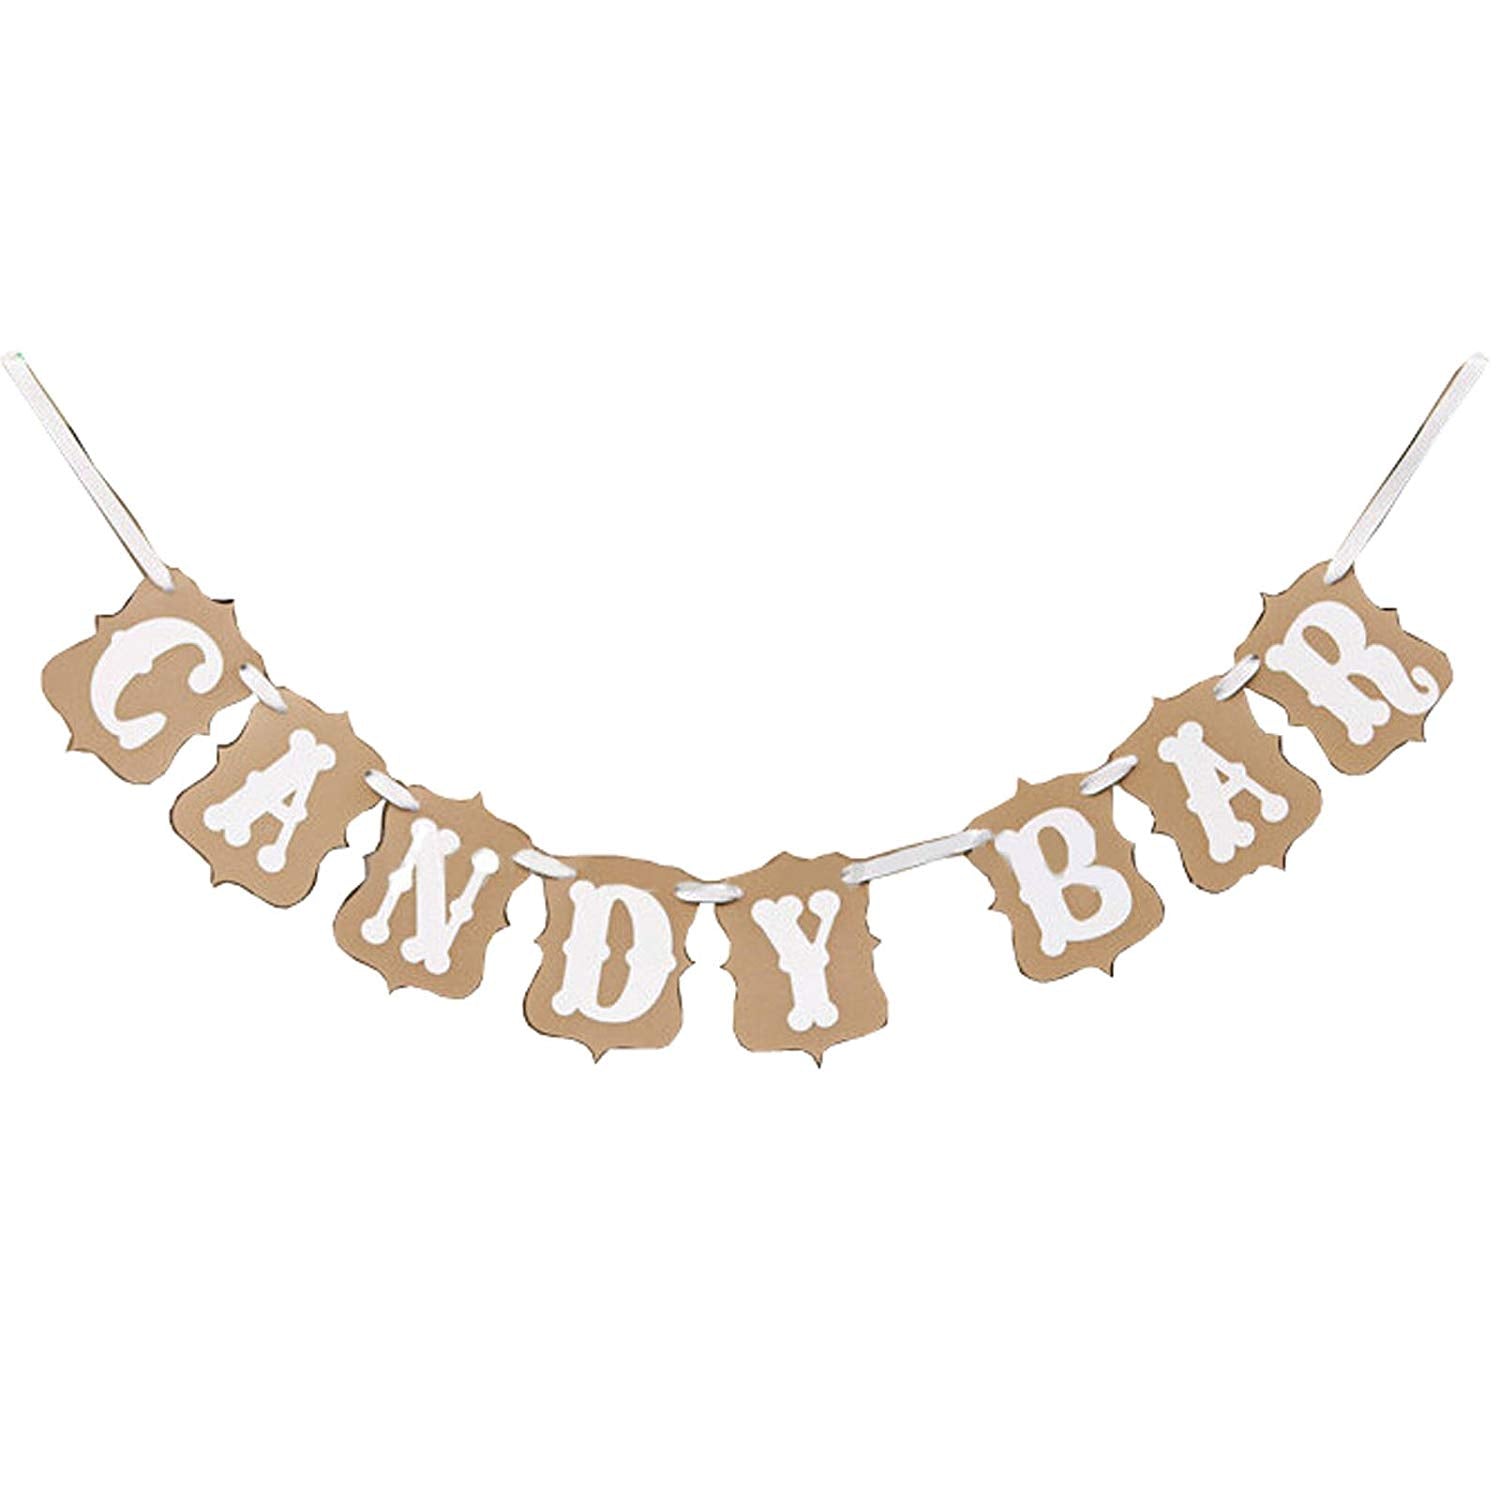 Candy Bar Bunting Banner for Wedding Anniversary Birthday Parties 11x15cm